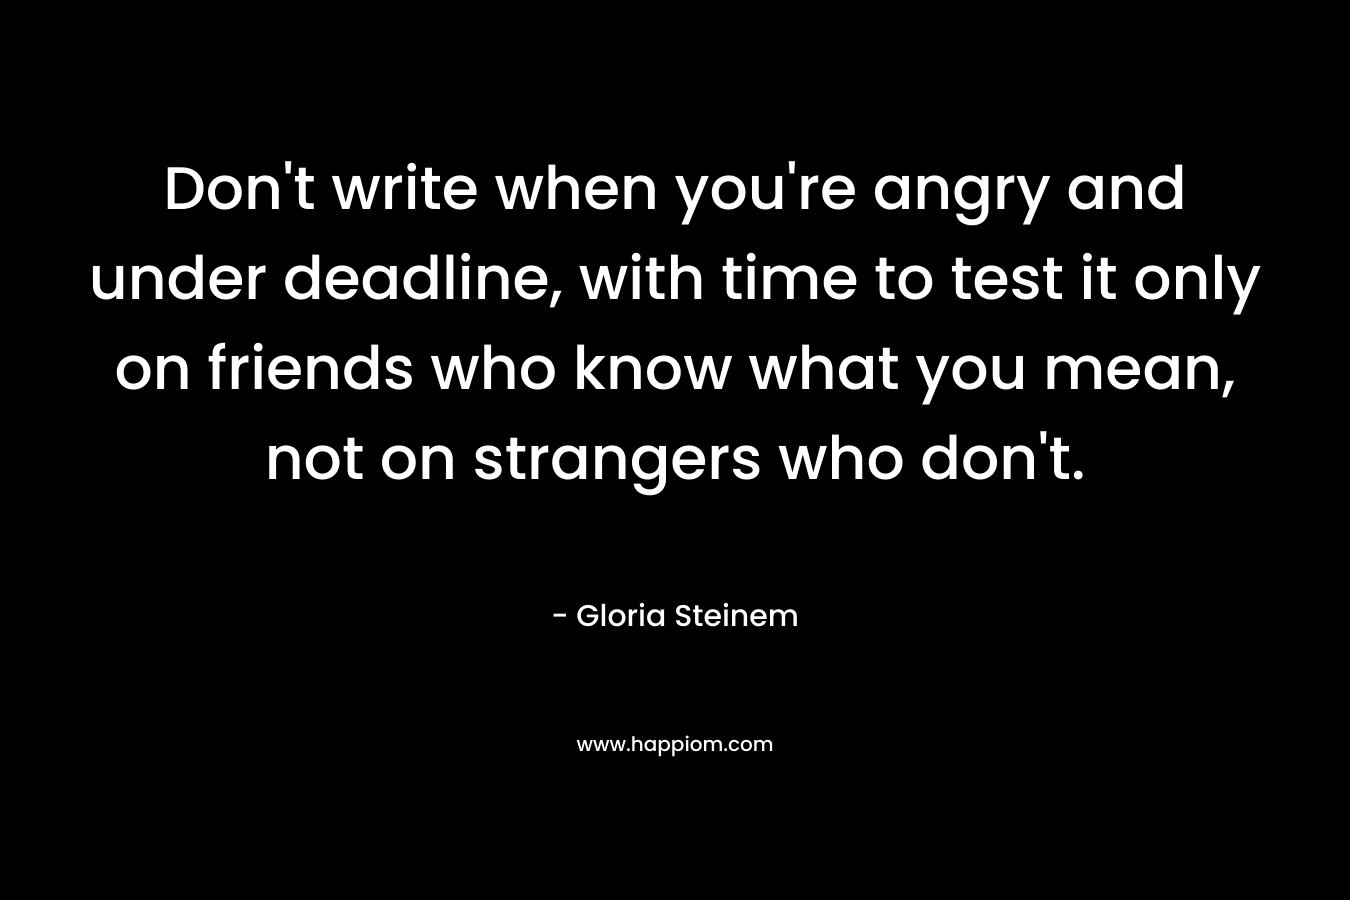 Don’t write when you’re angry and under deadline, with time to test it only on friends who know what you mean, not on strangers who don’t. – Gloria Steinem